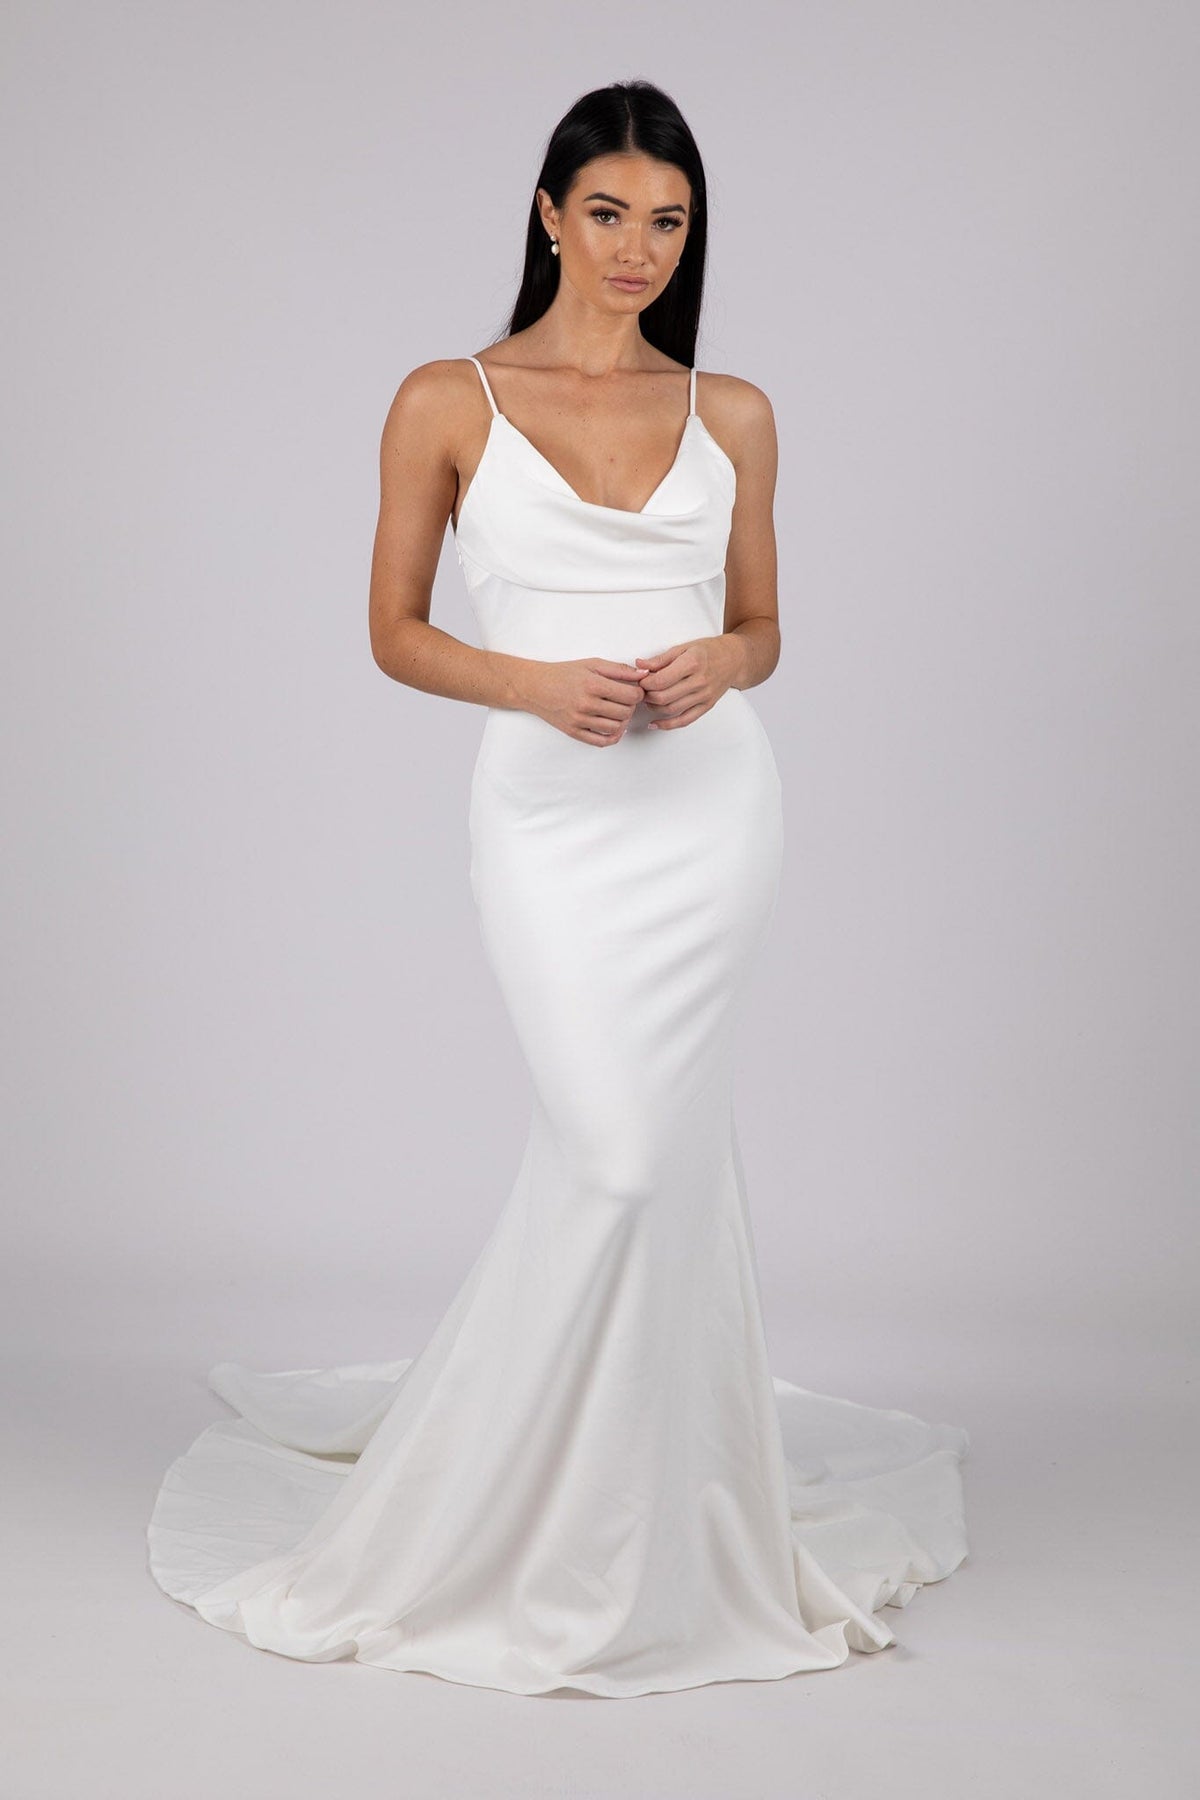 Ivory White Fit and Flare Wedding Gown with Cowl Neckline, Thin Shoulder Straps and Backless with Cowl Back Detail